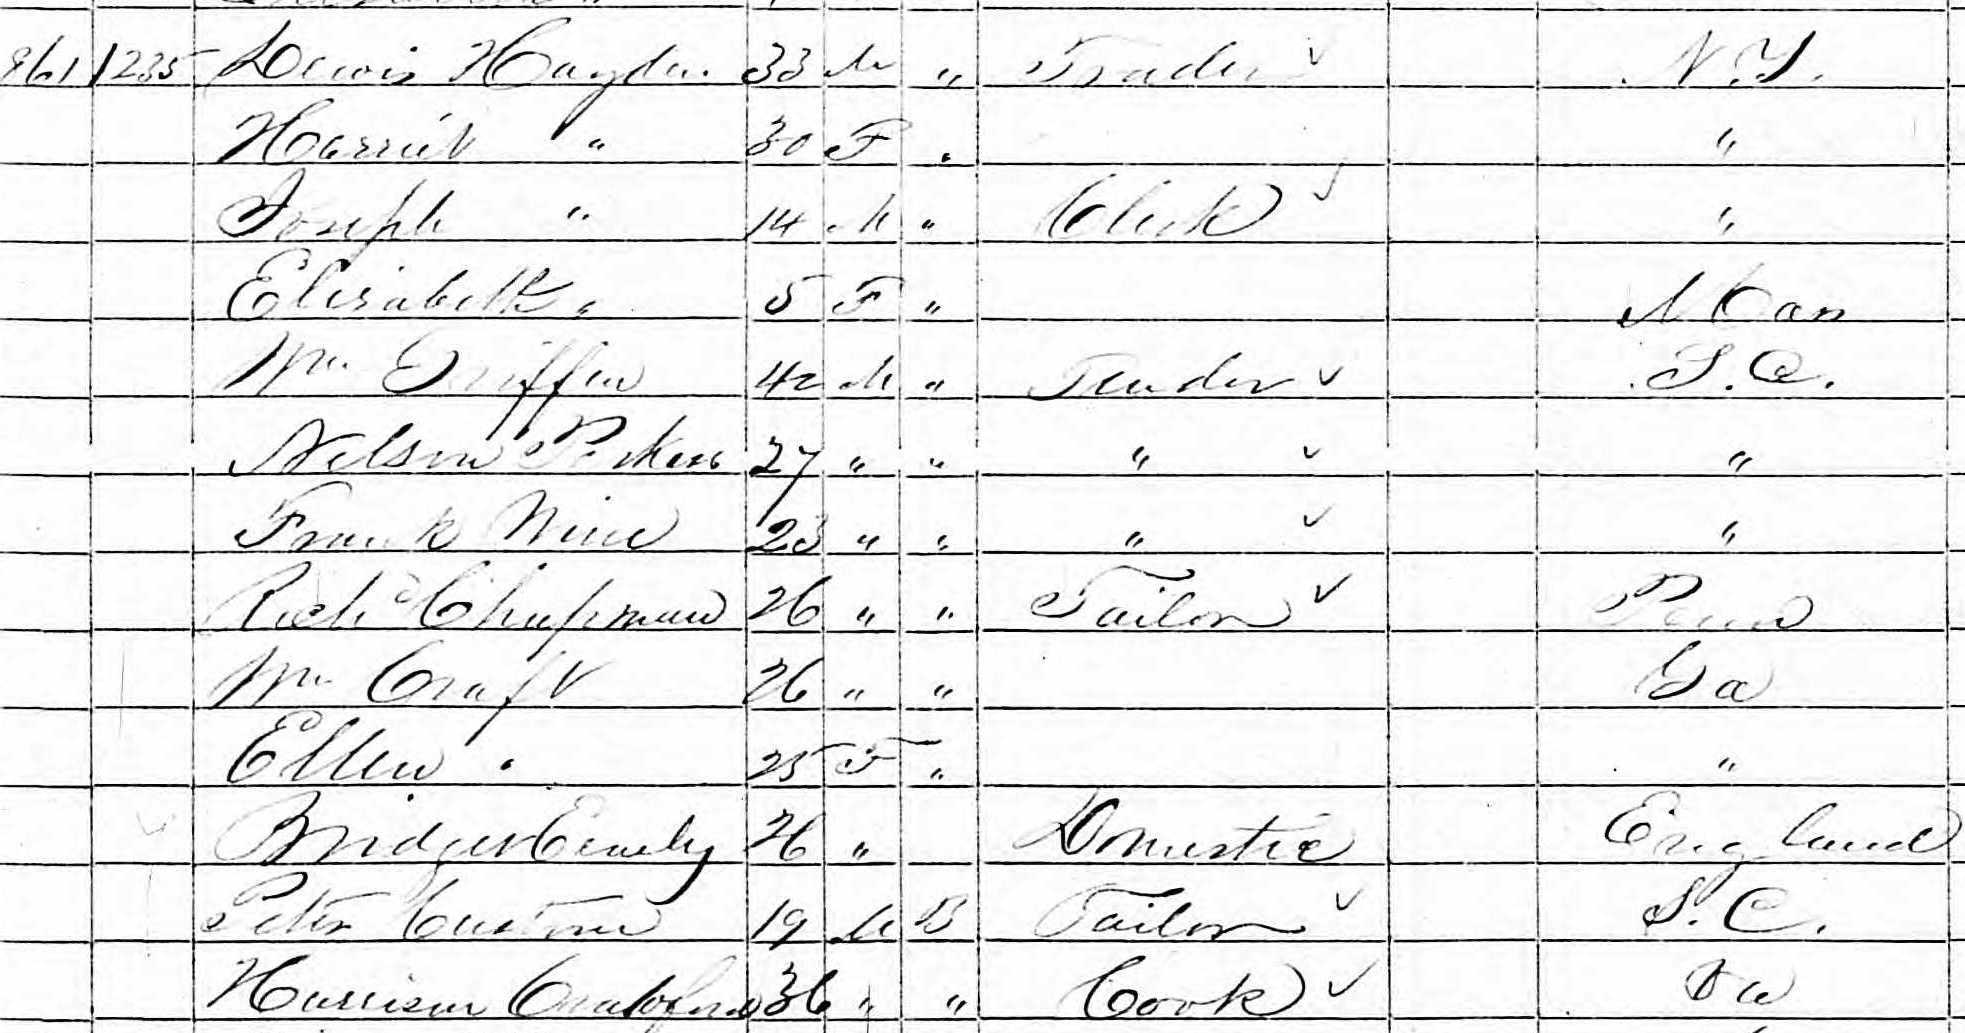 1850 Census Record of the Haydens and Crafts.